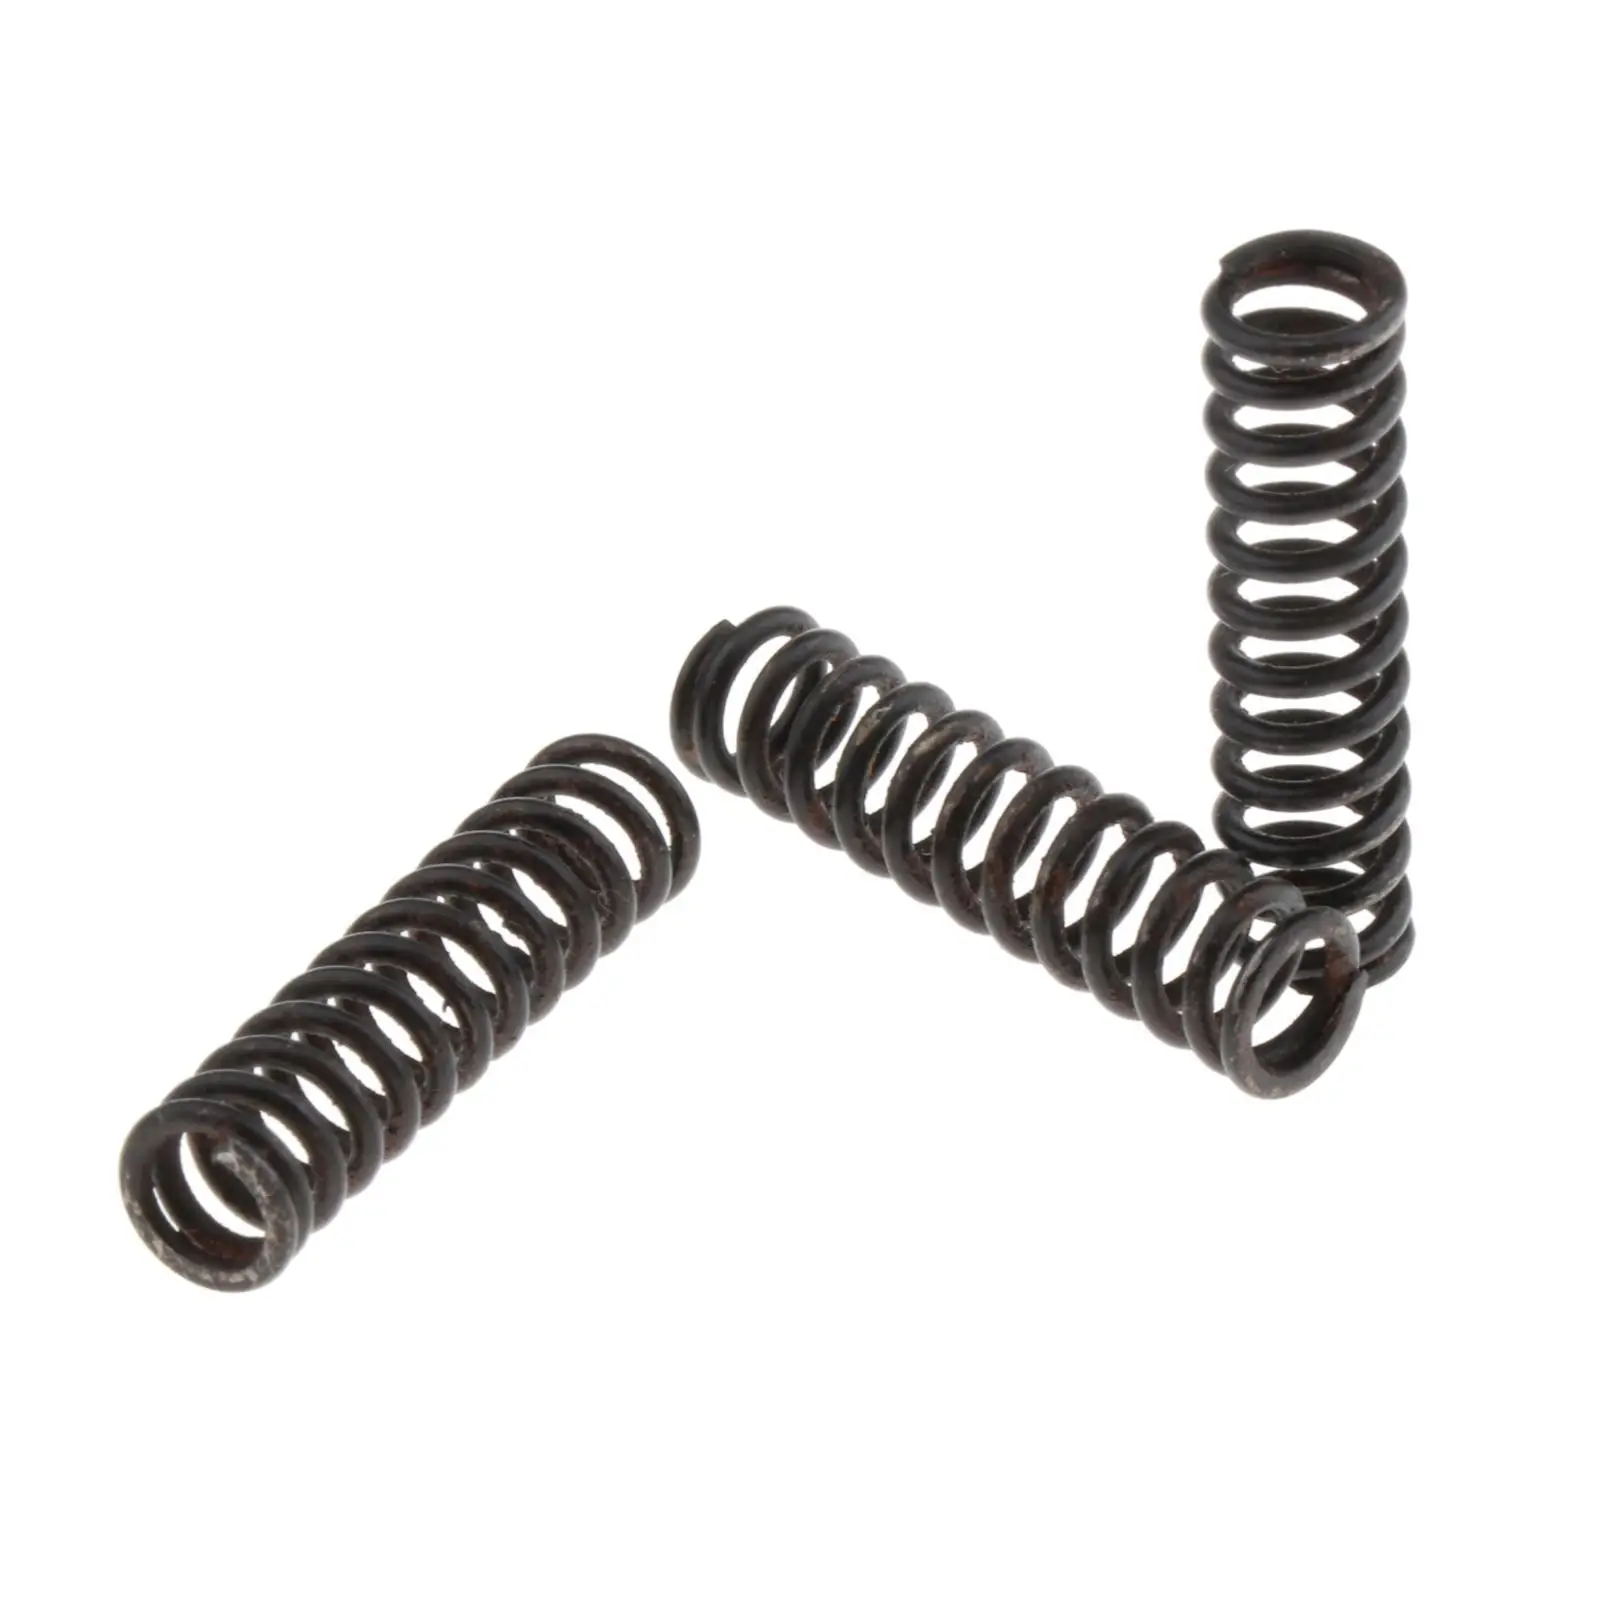 3Pcs Detent Springs for    H K B/D/F/H/ Transmission - Made of high quality material, reliable quality and durable